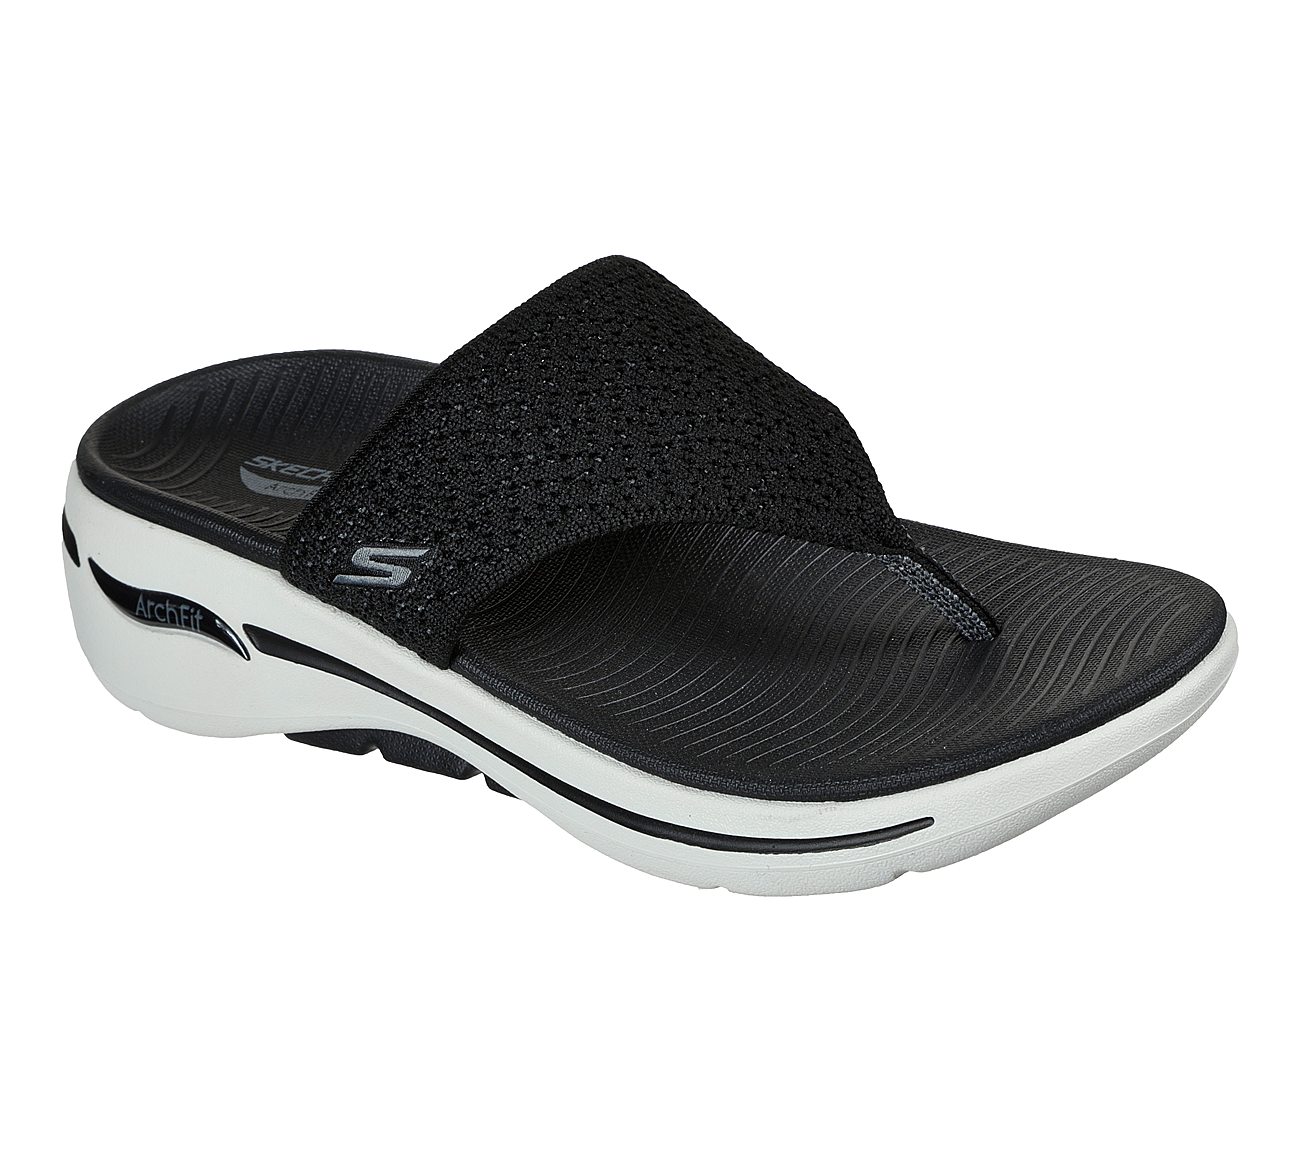 GO WALK ARCH FIT SANDAL - WEE, BLACK/WHITE Footwear Lateral View